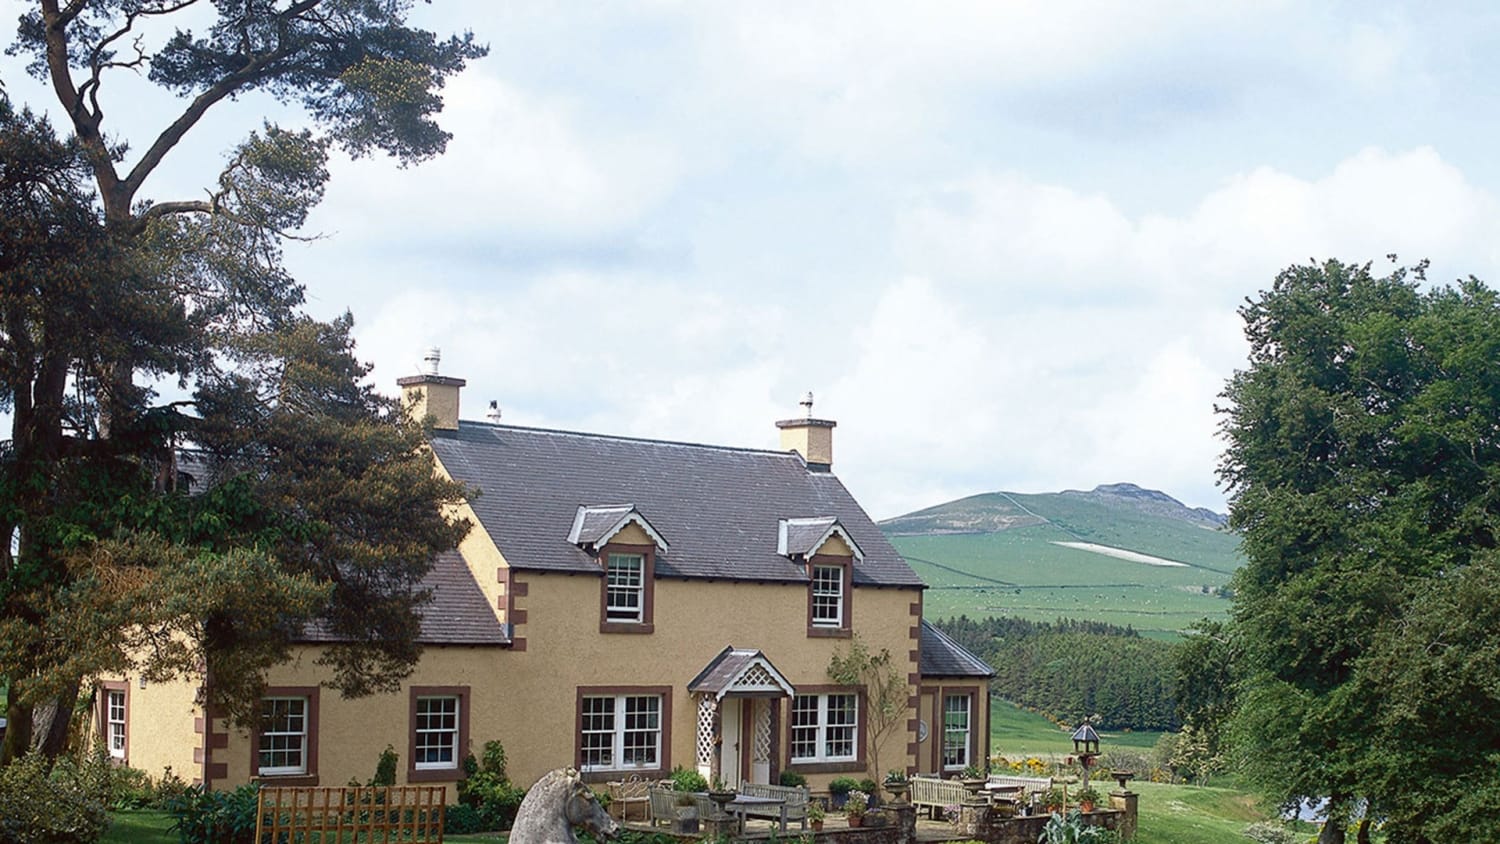 An artist's house in the Scottish borders